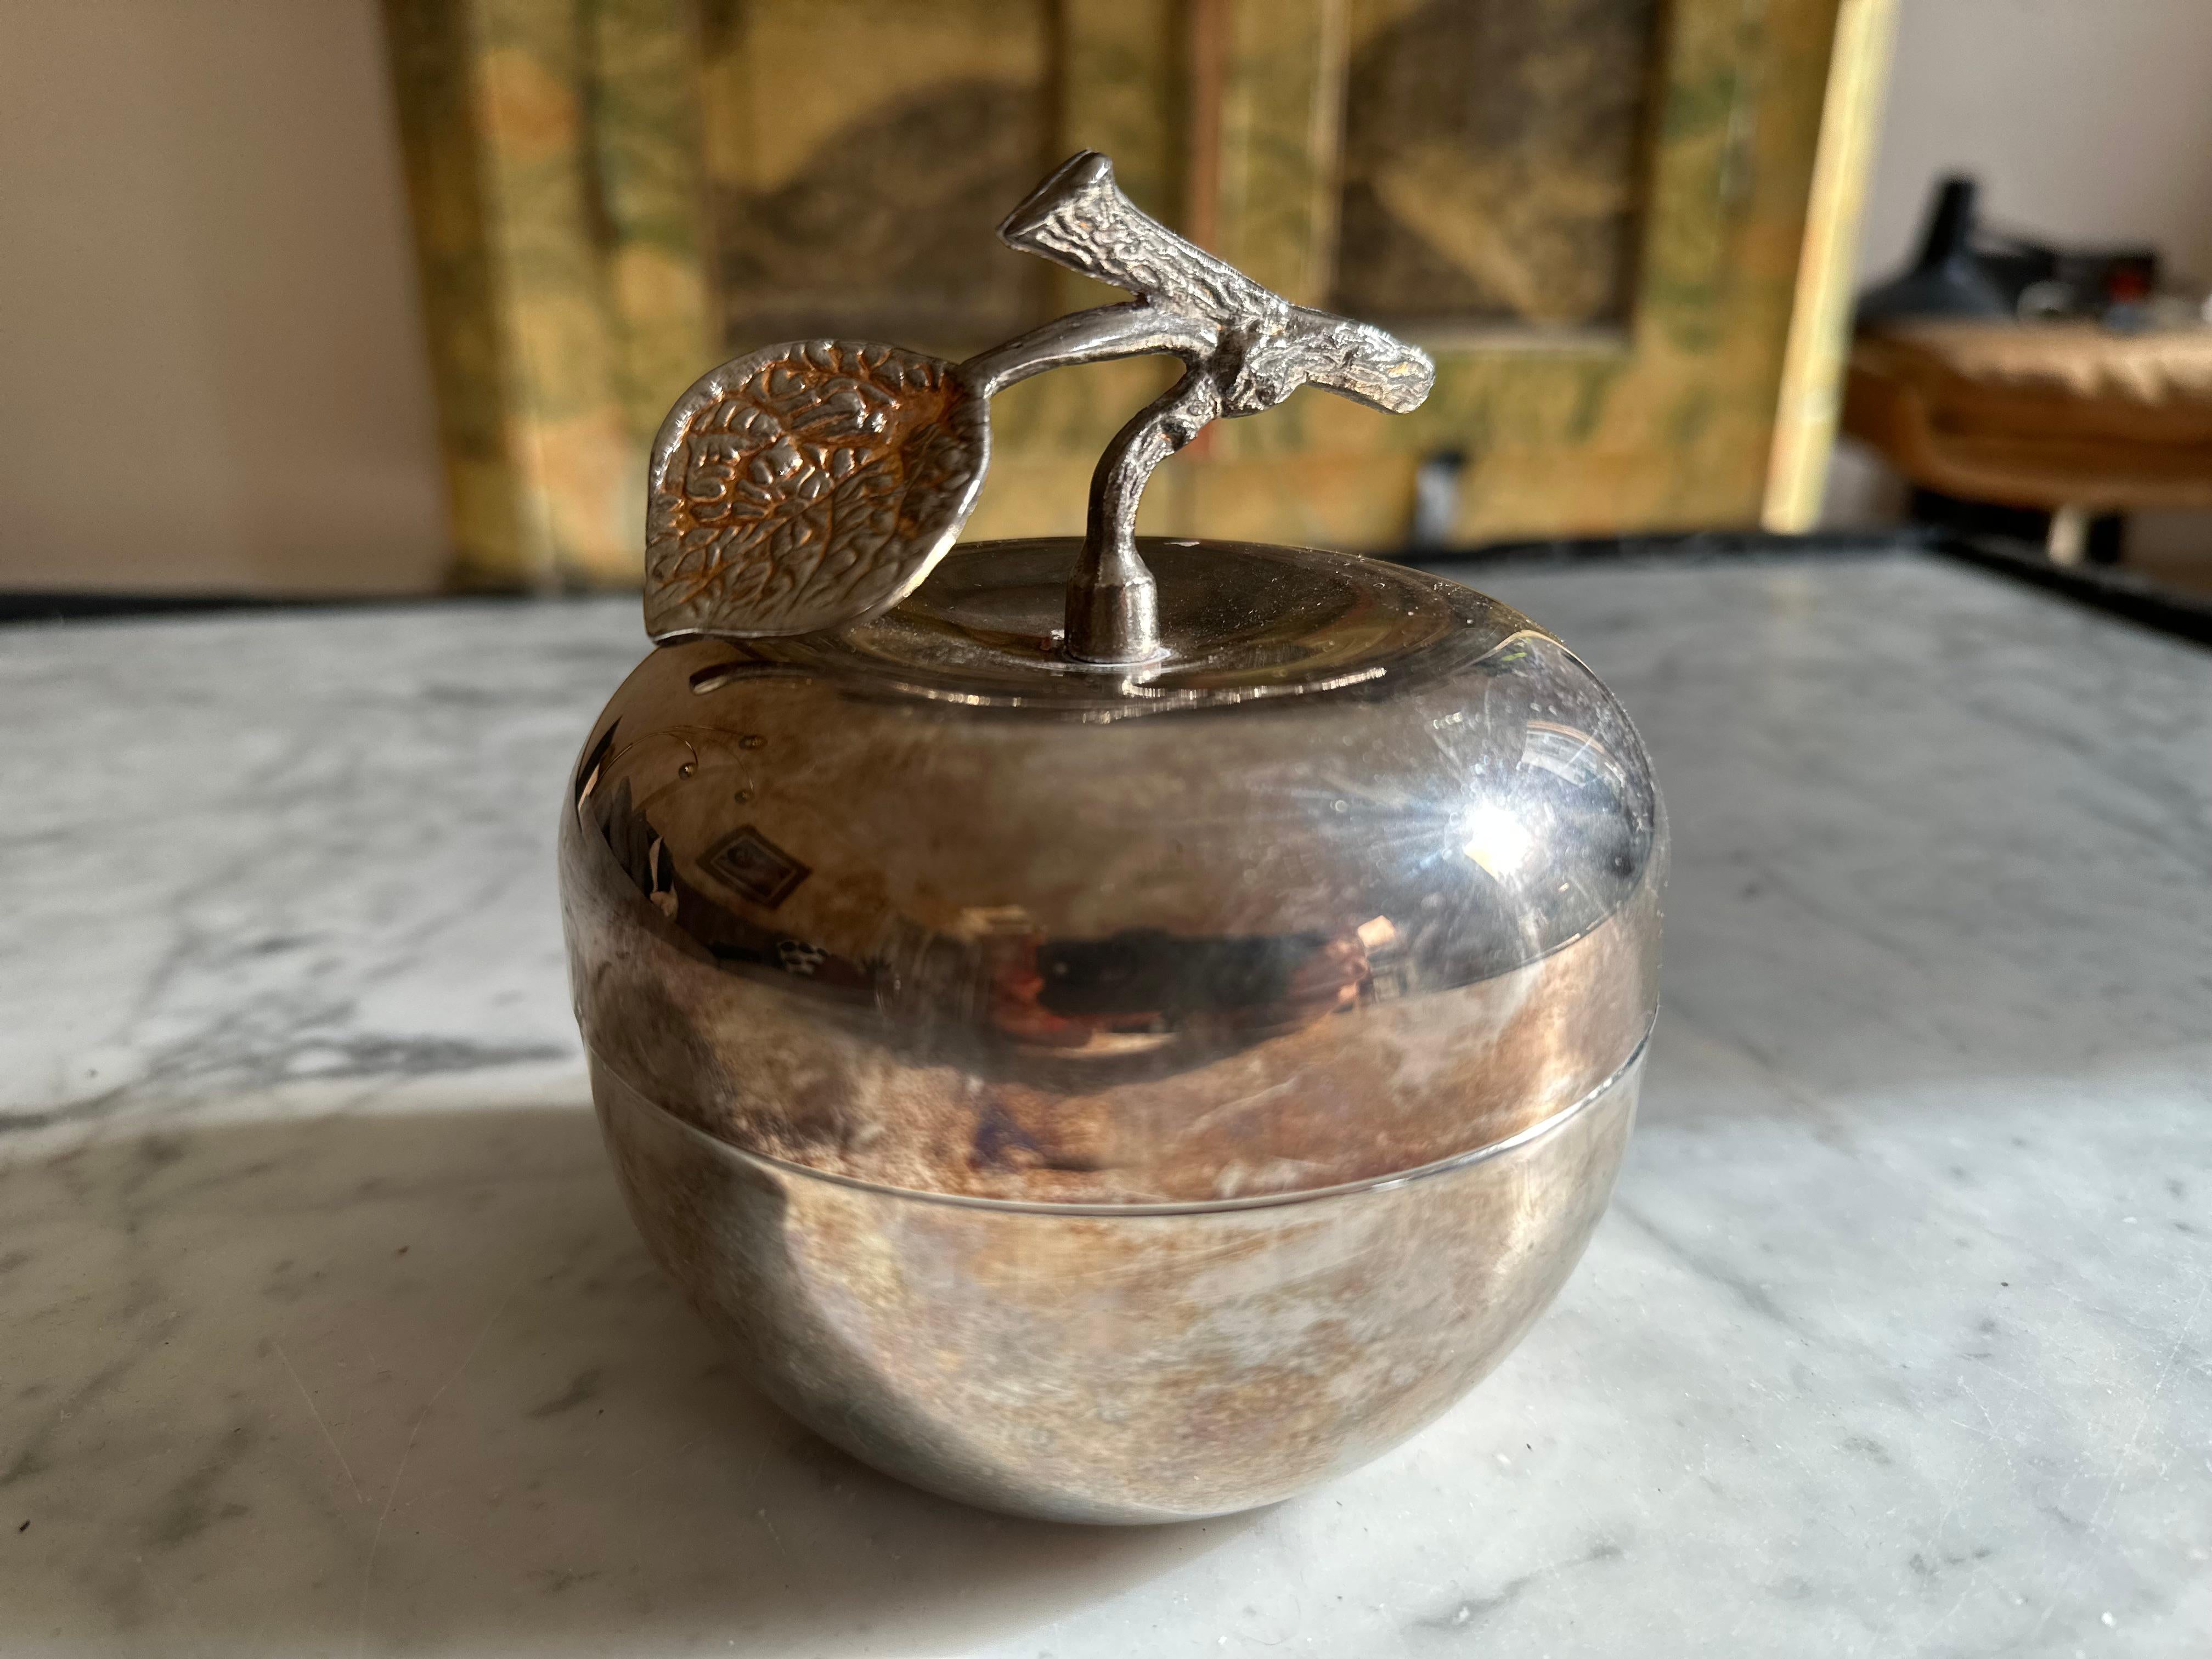 Transport yourself back to the stylish era of the 1970s with this charming vintage Italian apple-shaped lidded box. Crafted with meticulous attention to detail, this silver-plated masterpiece boasts a small branch as its distinctive handle, adorned